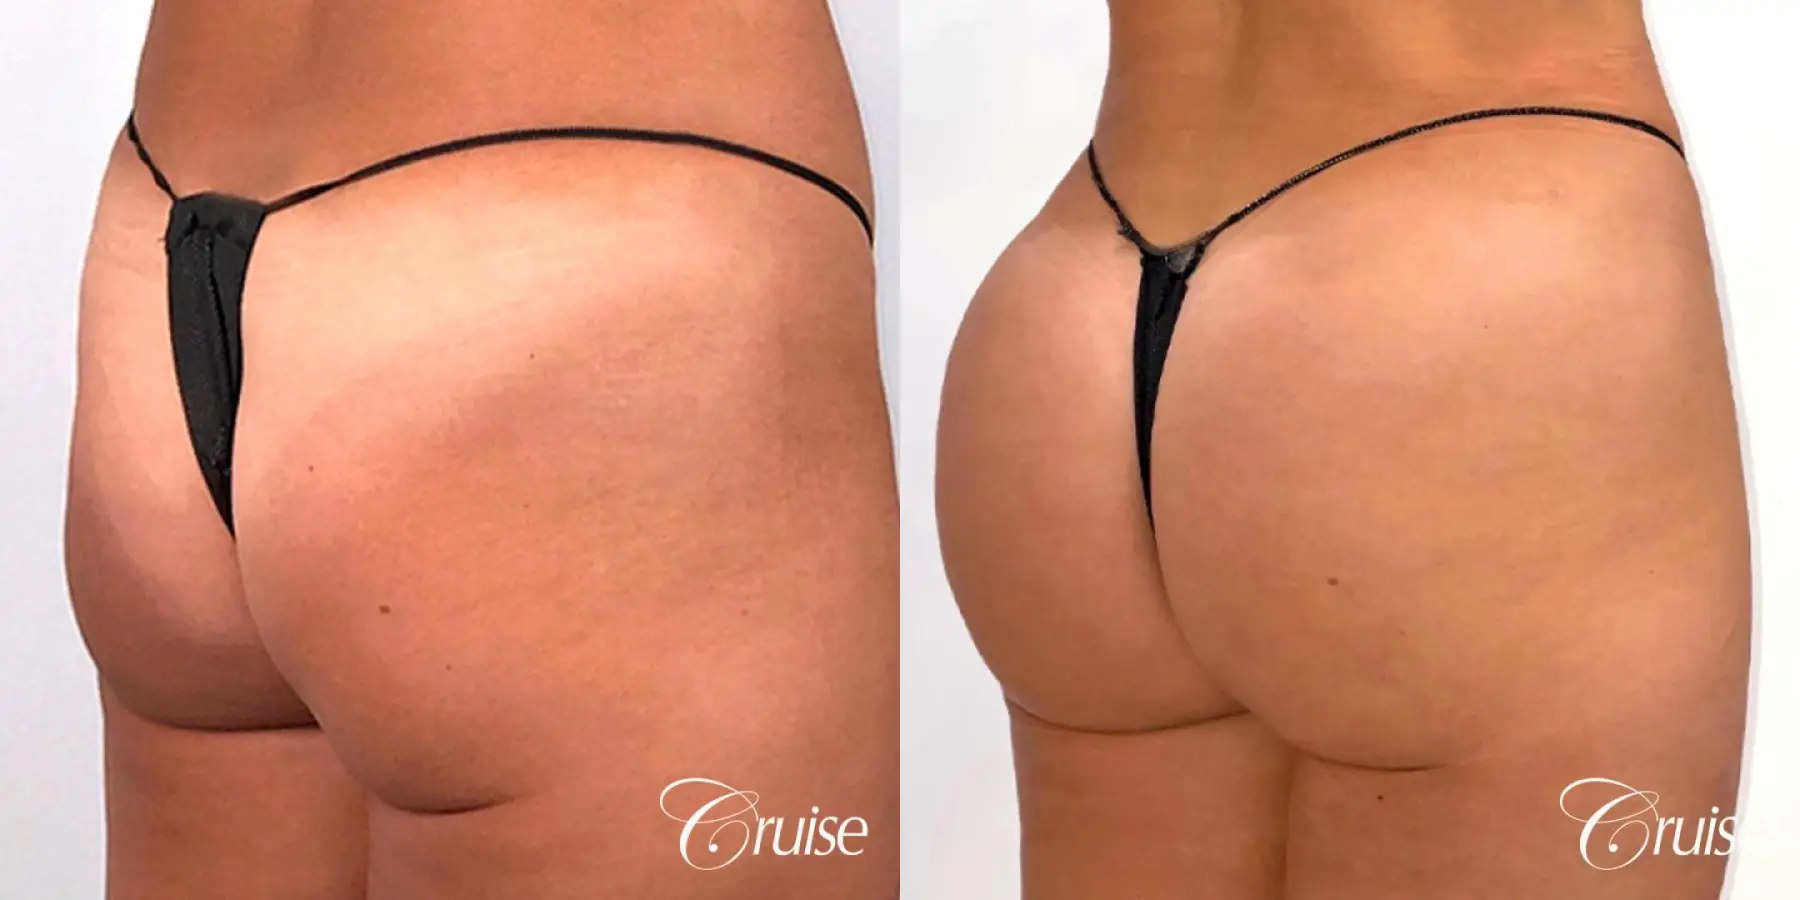 Brazilian Butt Lift with Liposuction to Stomach & Flanks - Before and After 3